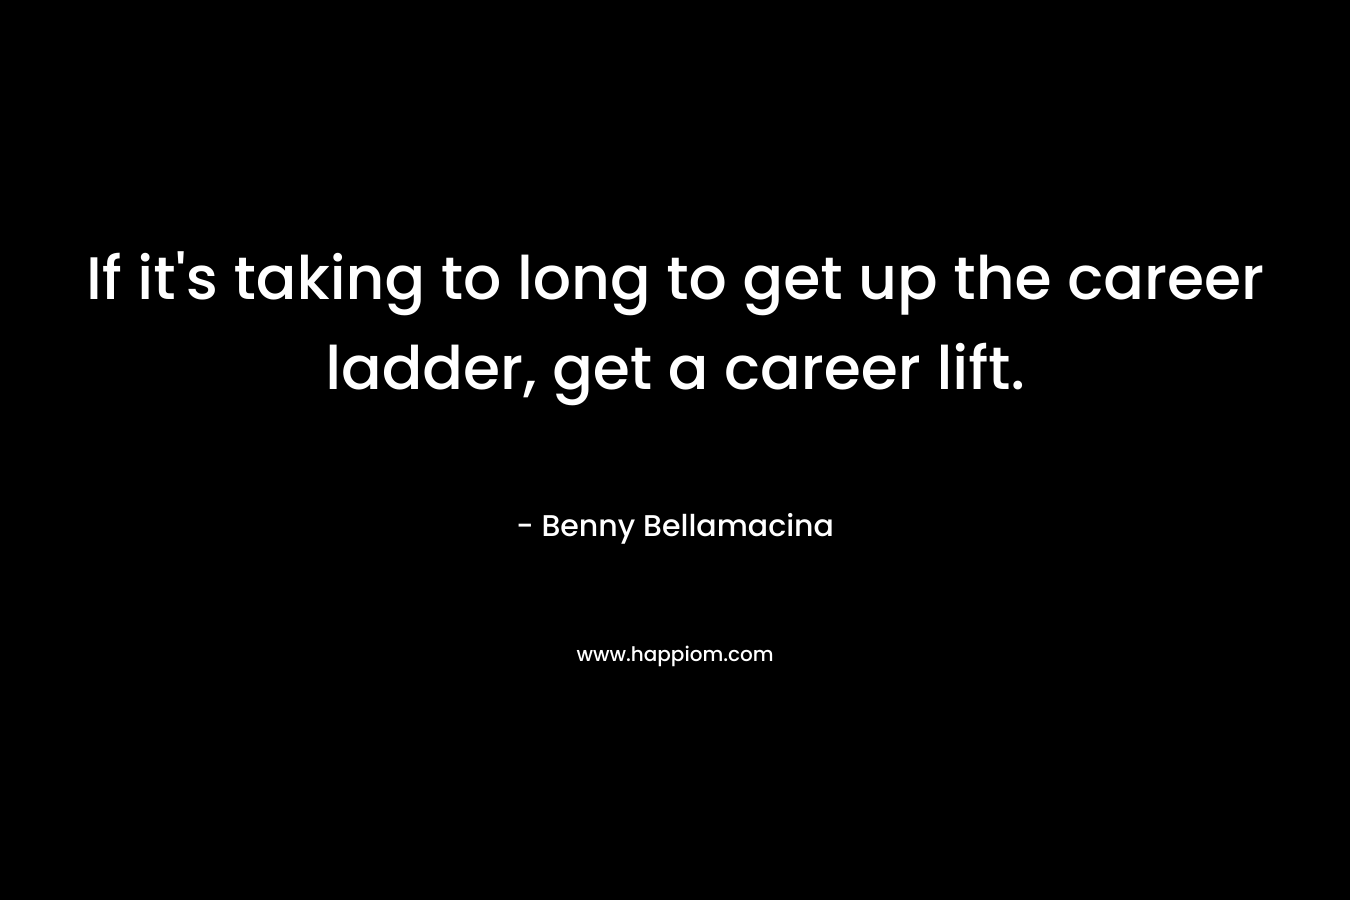 If it's taking to long to get up the career ladder, get a career lift.